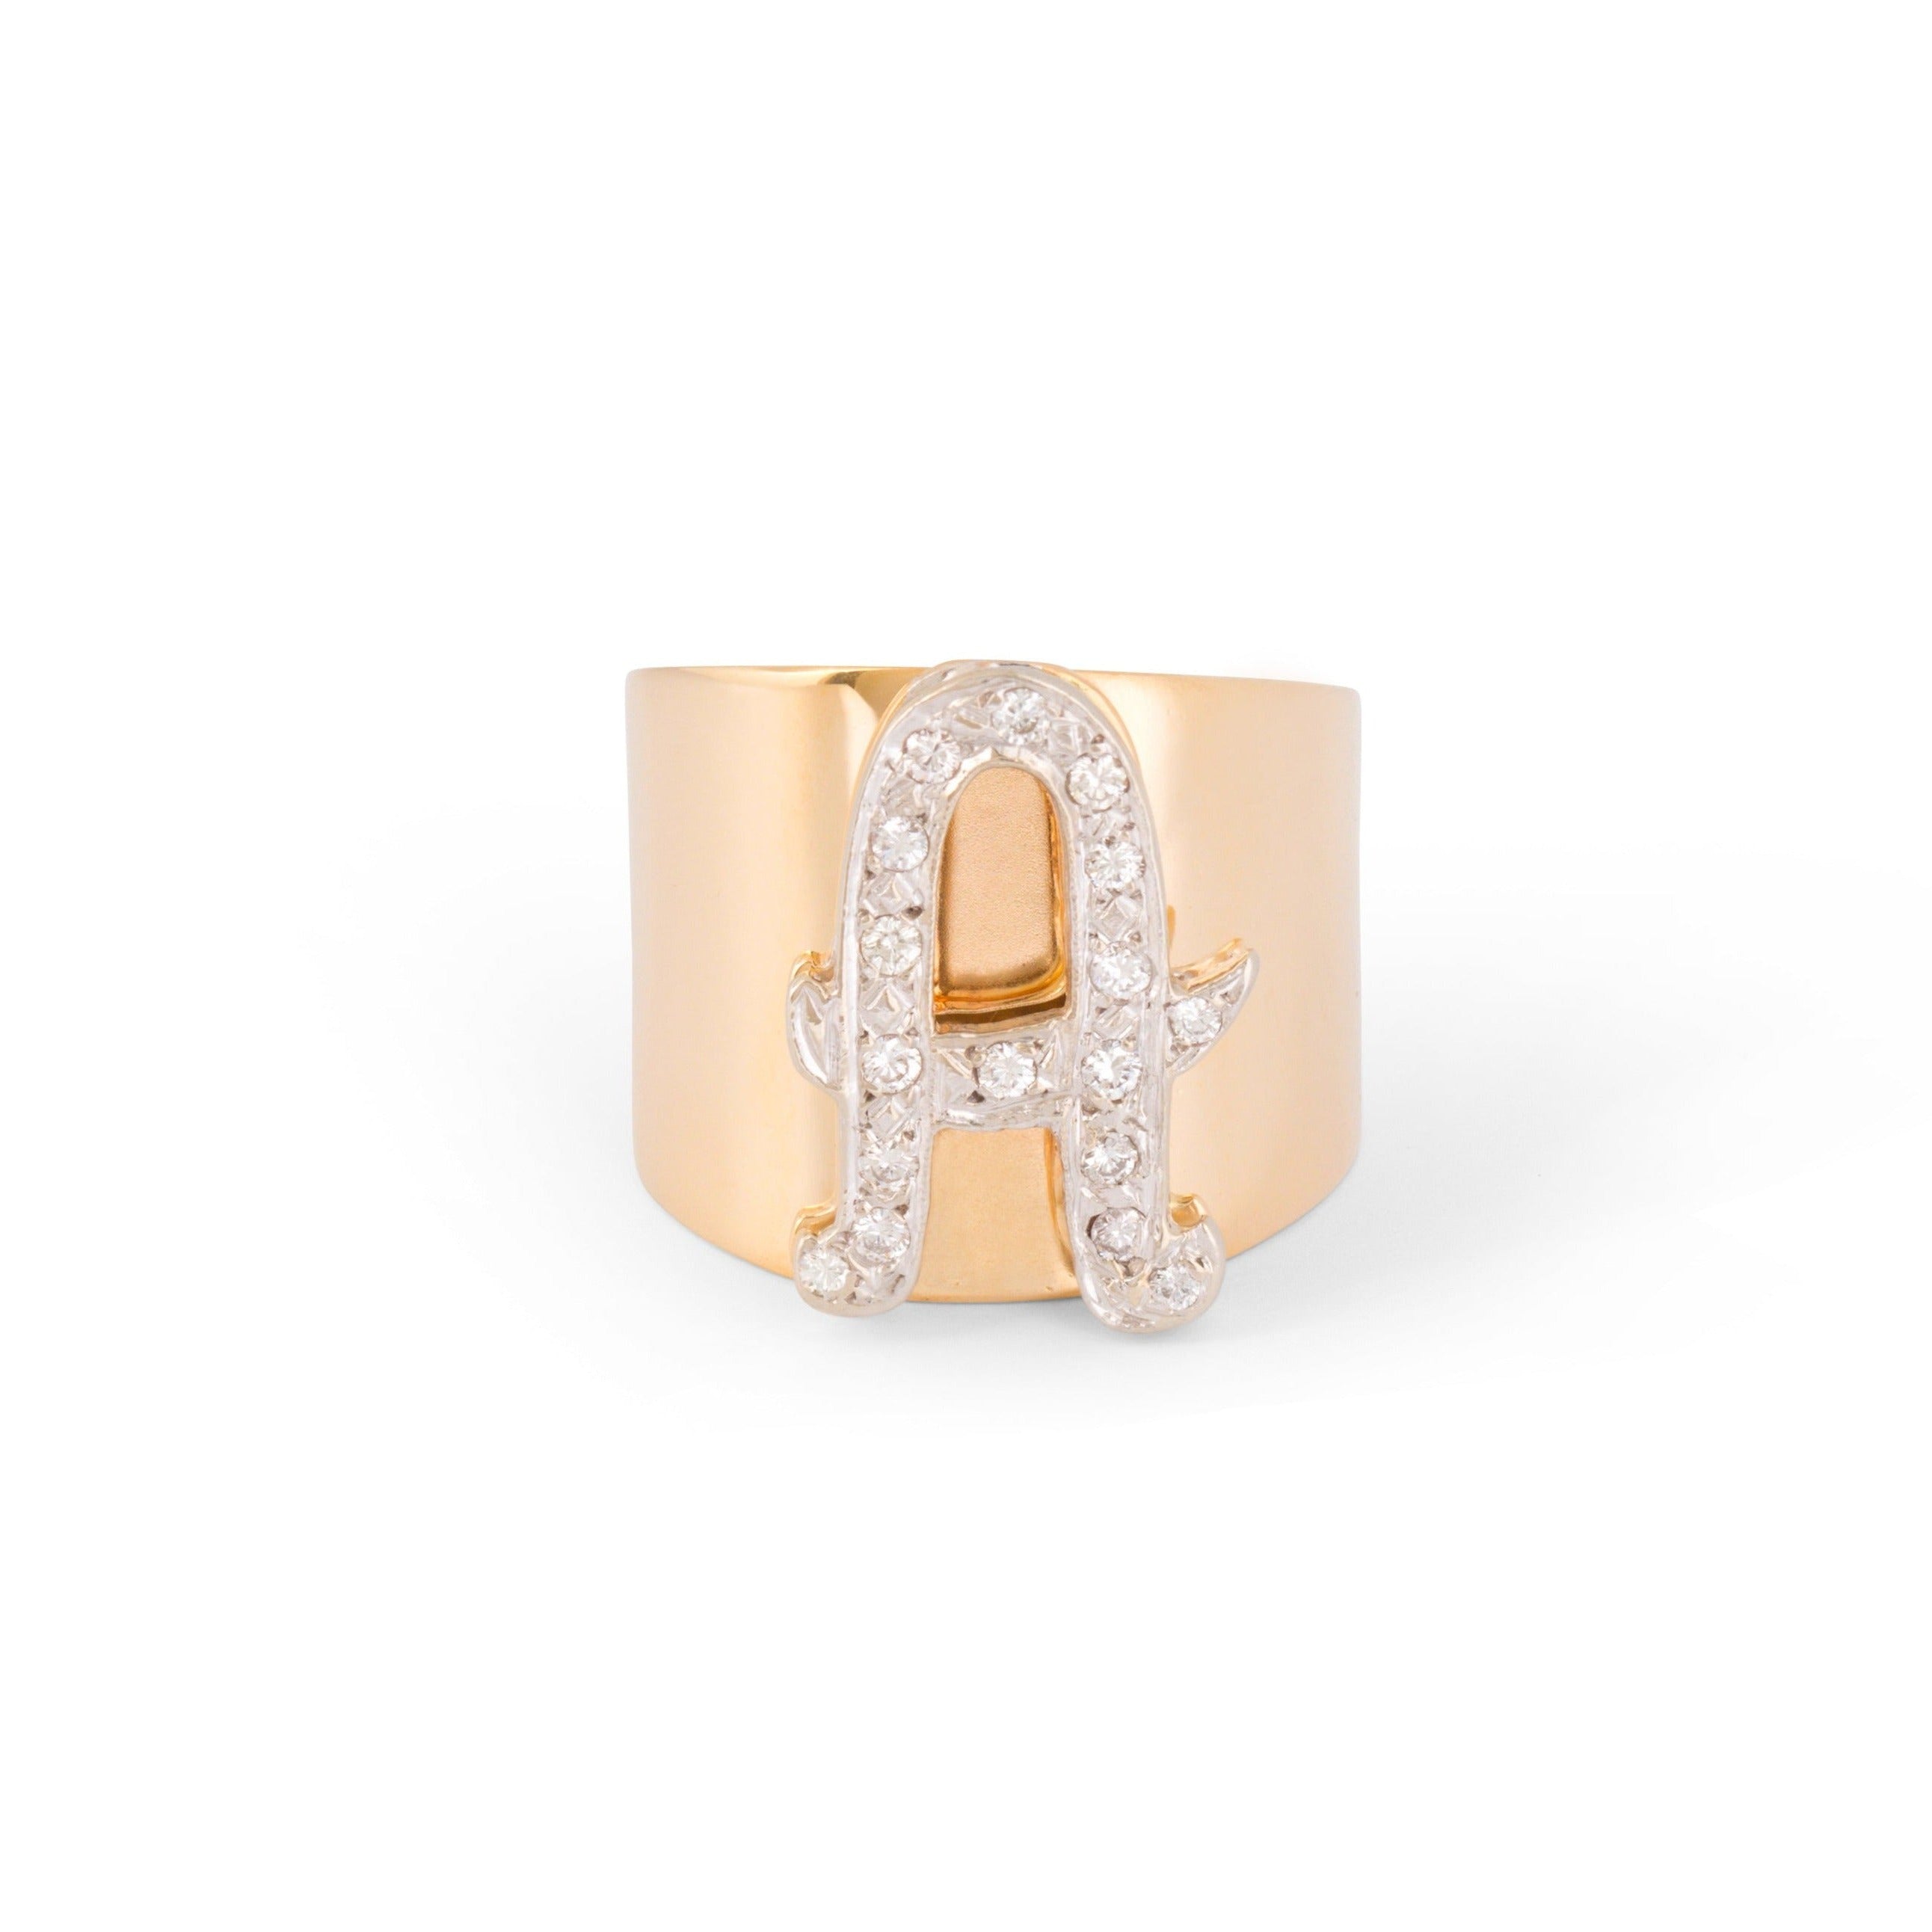 Diamond Letter "A" and 14k Gold Ring